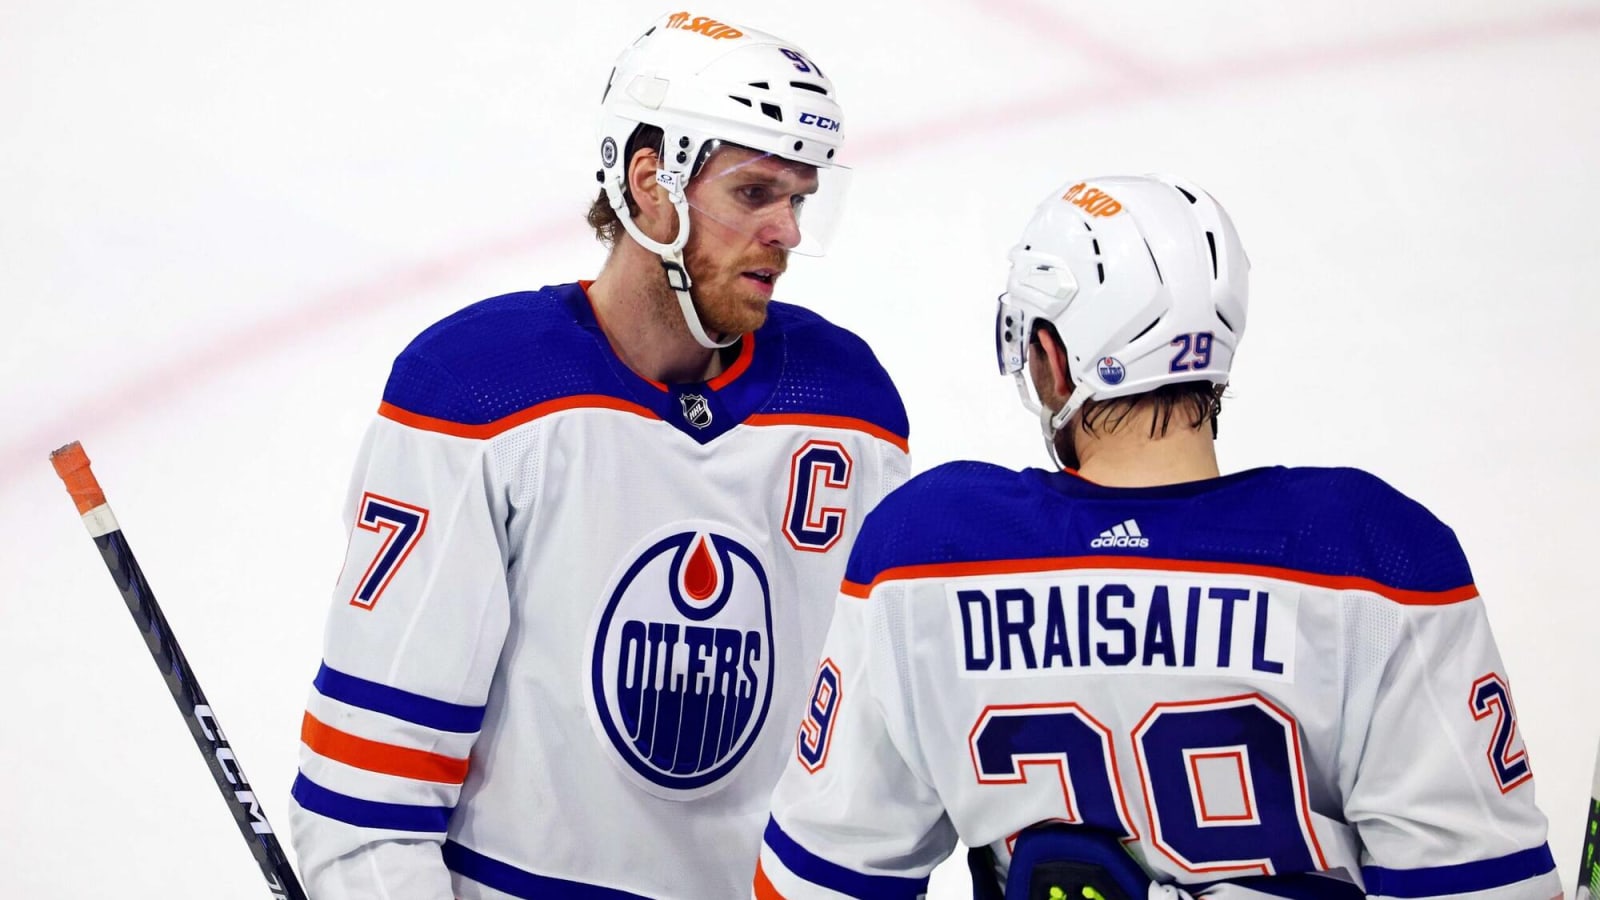 The Oilers are splitting up Connor McDavid and Leon Draisaitl